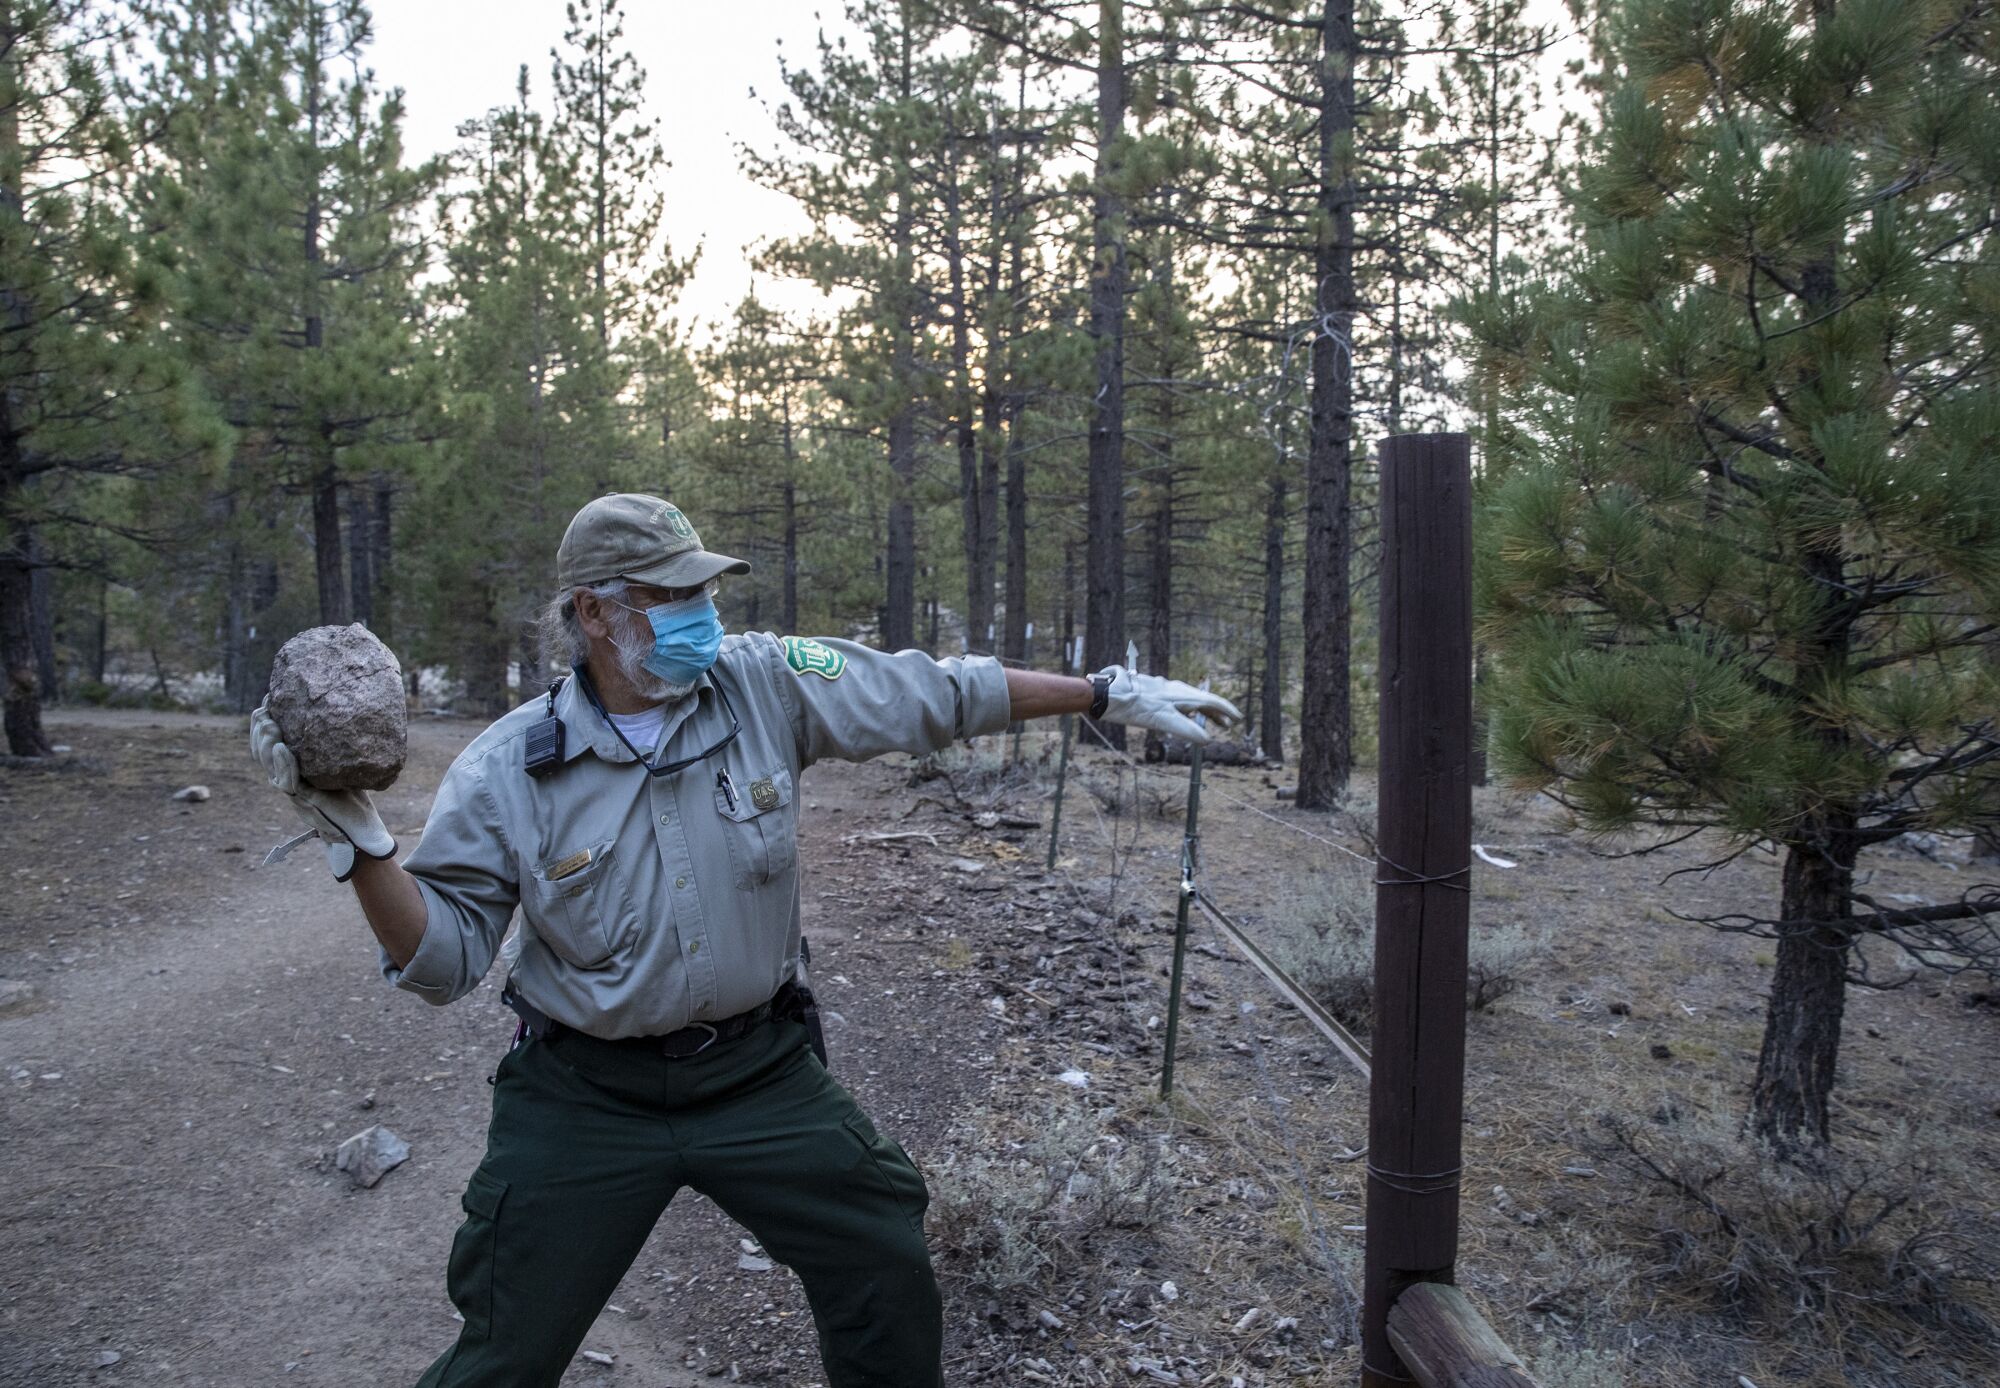  Forest protection officer Chon Bribiescas throws rocks from an illegal rock fire ring.